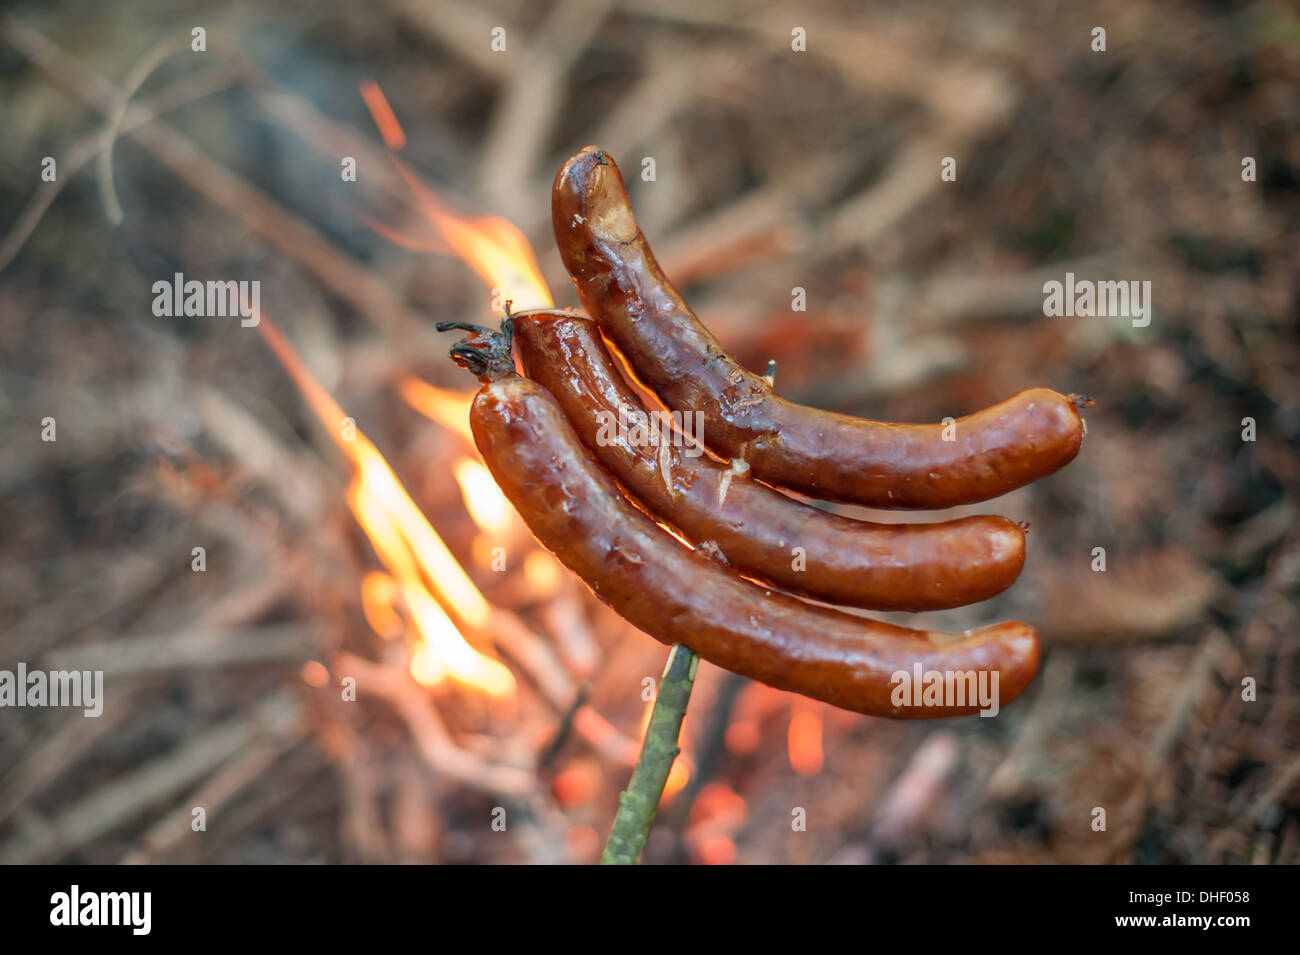 sausage roasted on camp fire Stock Photo